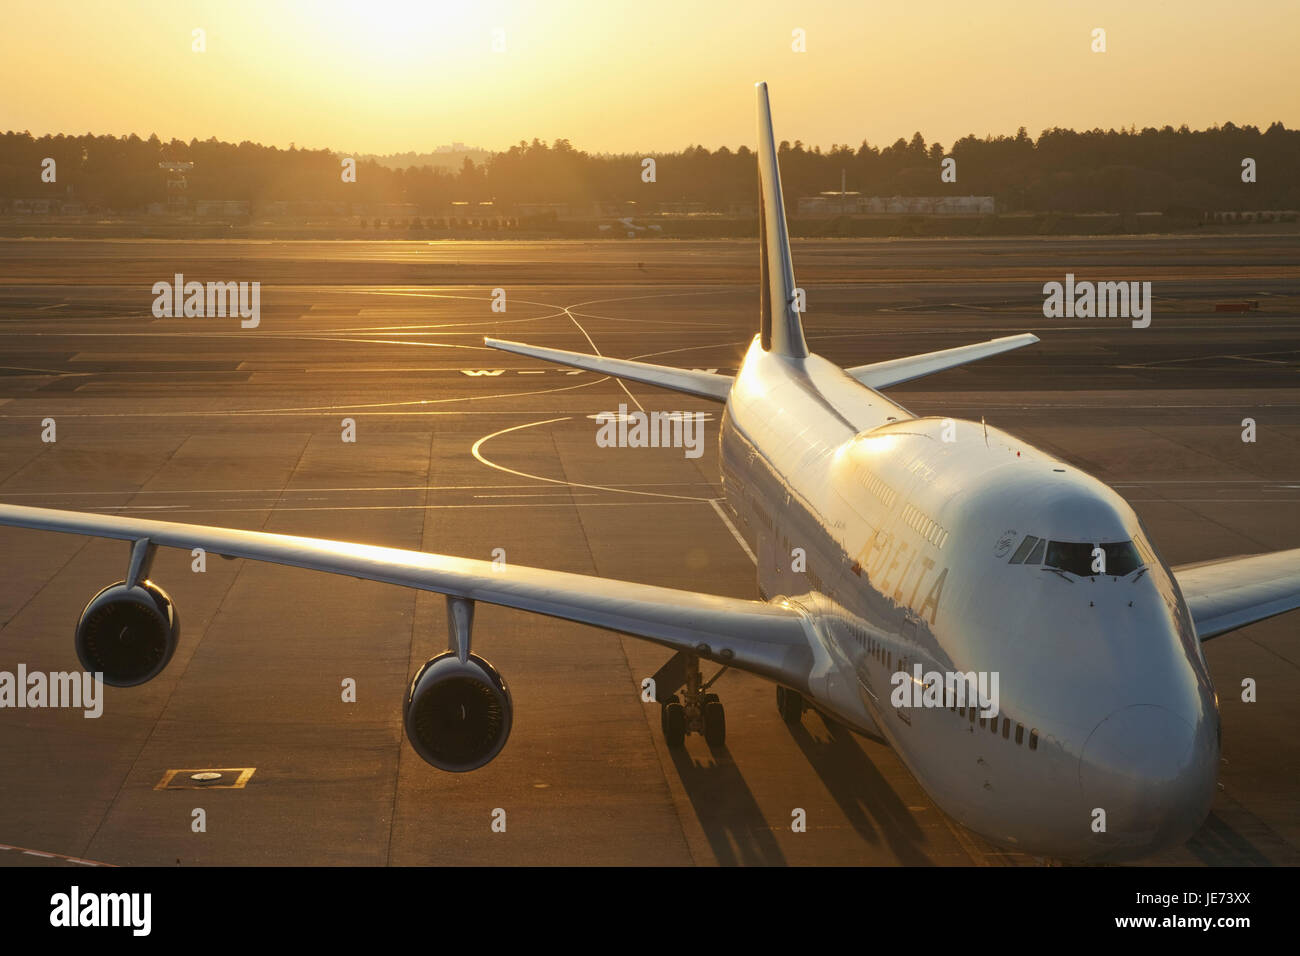 Japan, Tokyo, Narita Internationally airport, landing field, airplane, evening light, airport, outside, travel, journey by air, vacation, evening tuning, evening, nobody, arrival, takeoff, Stock Photo